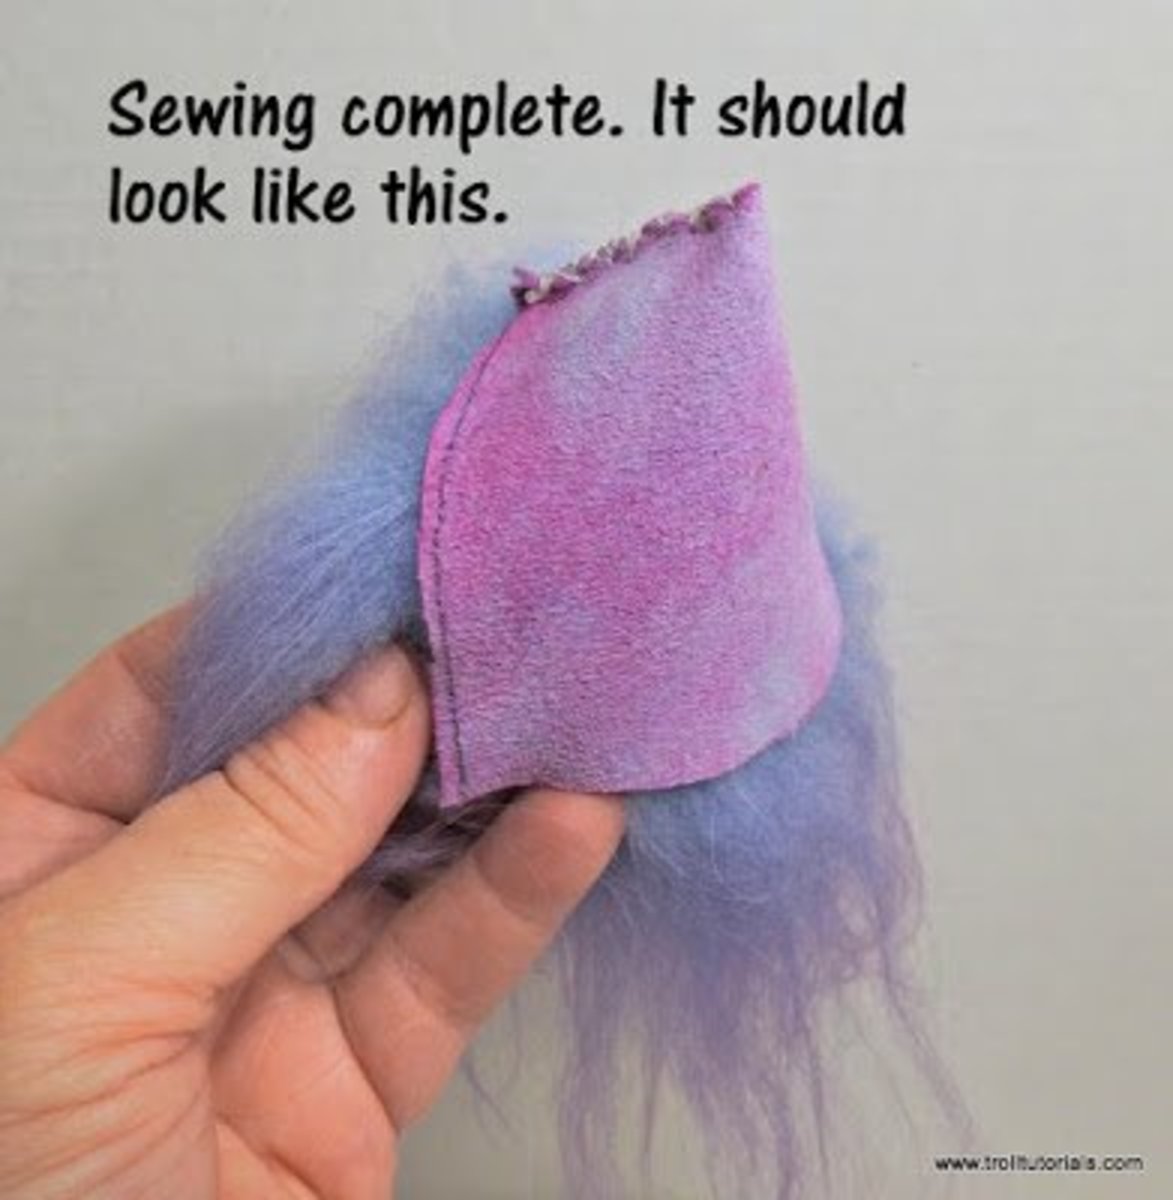 4. When you are done sewing up your troll replacement wig, it should look like this. 